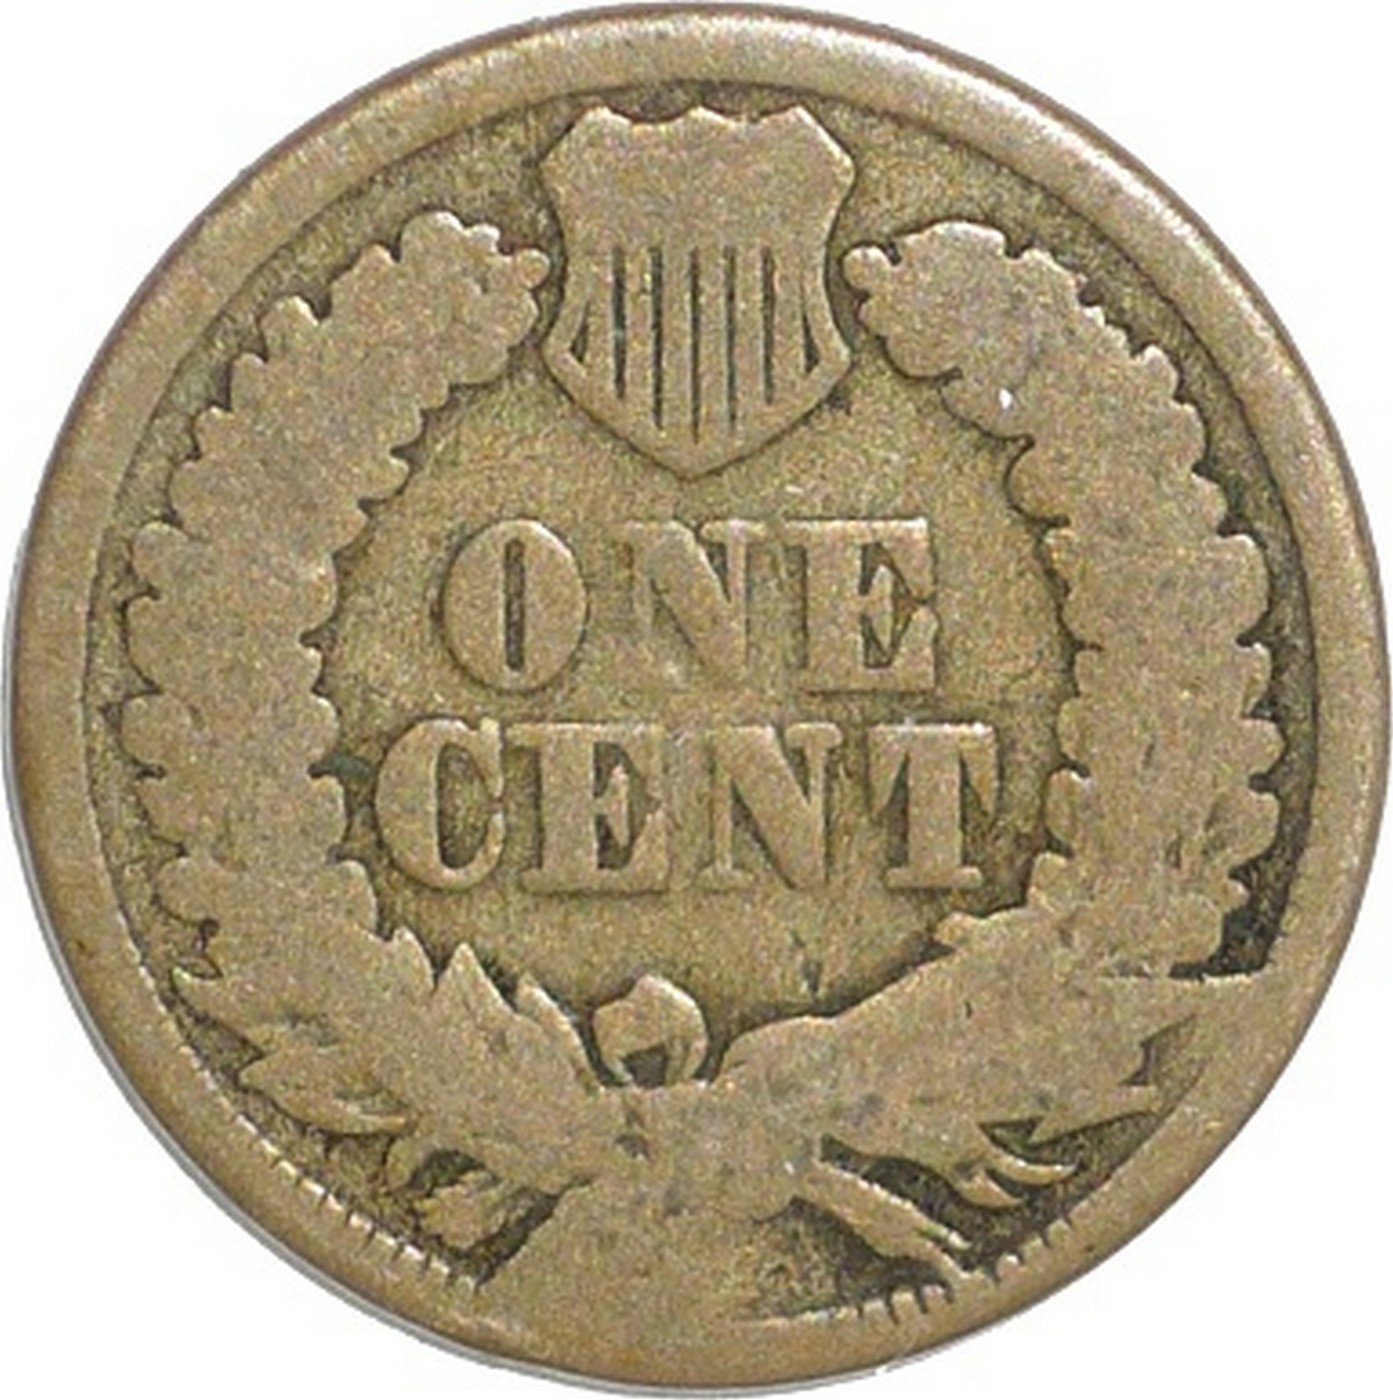 1862 CUD-015 - Indian Head Cent - Photo by David Poliquin